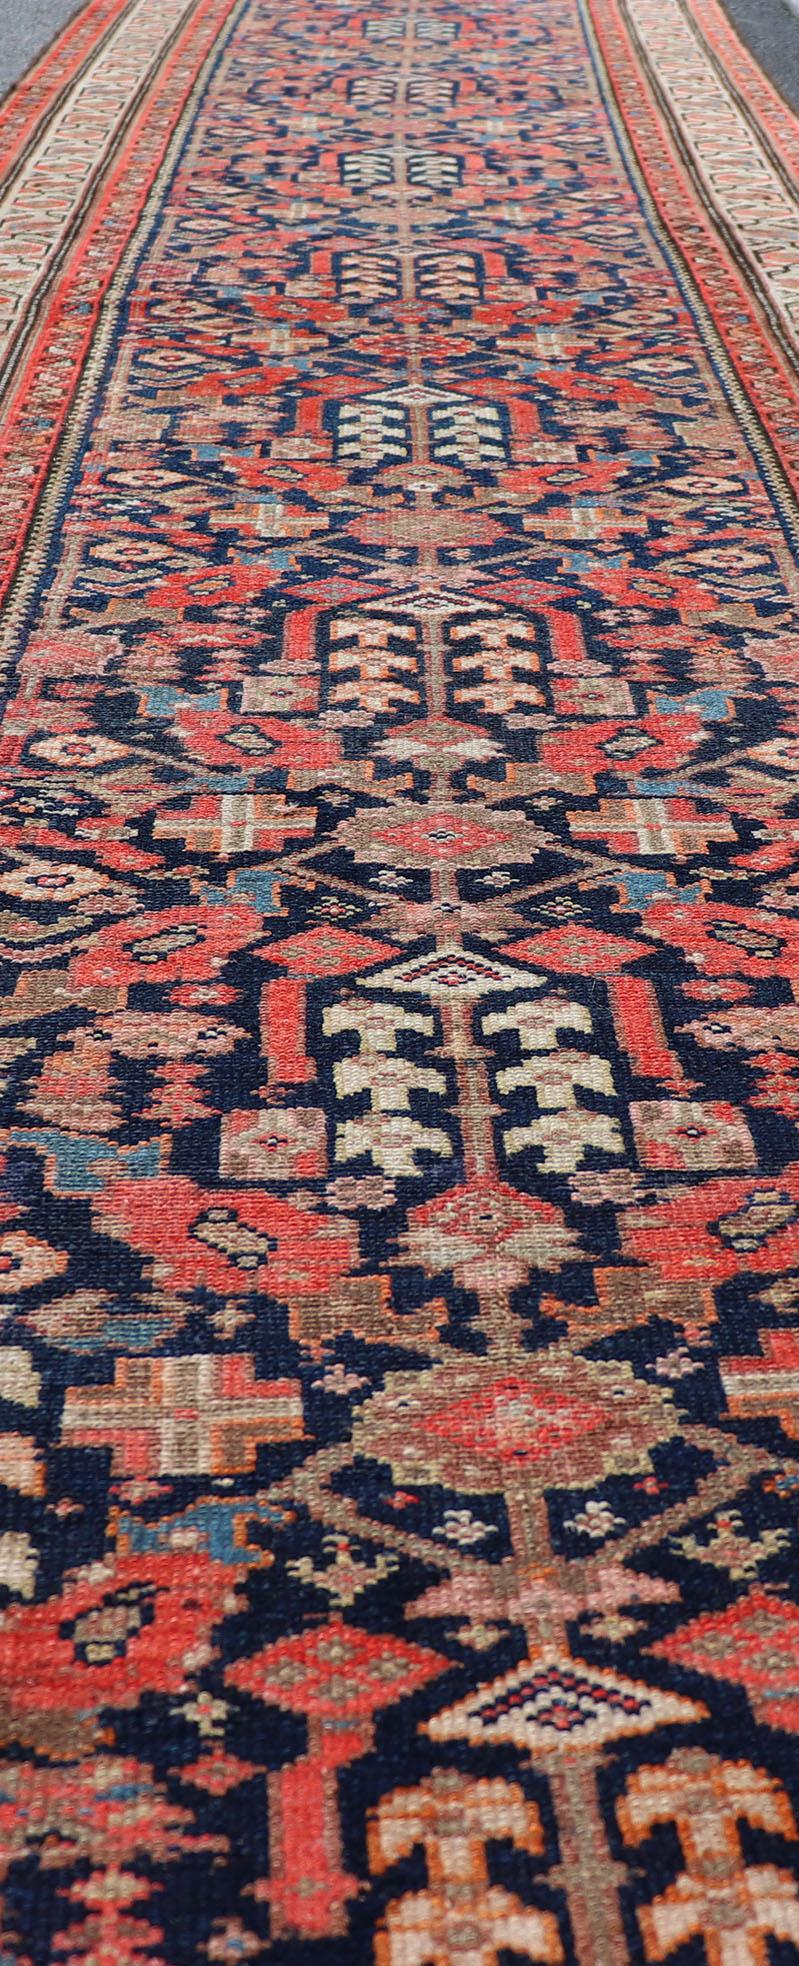 Antique Malayer Long Runner in Orange, Blue and Brown In Good Condition For Sale In Atlanta, GA